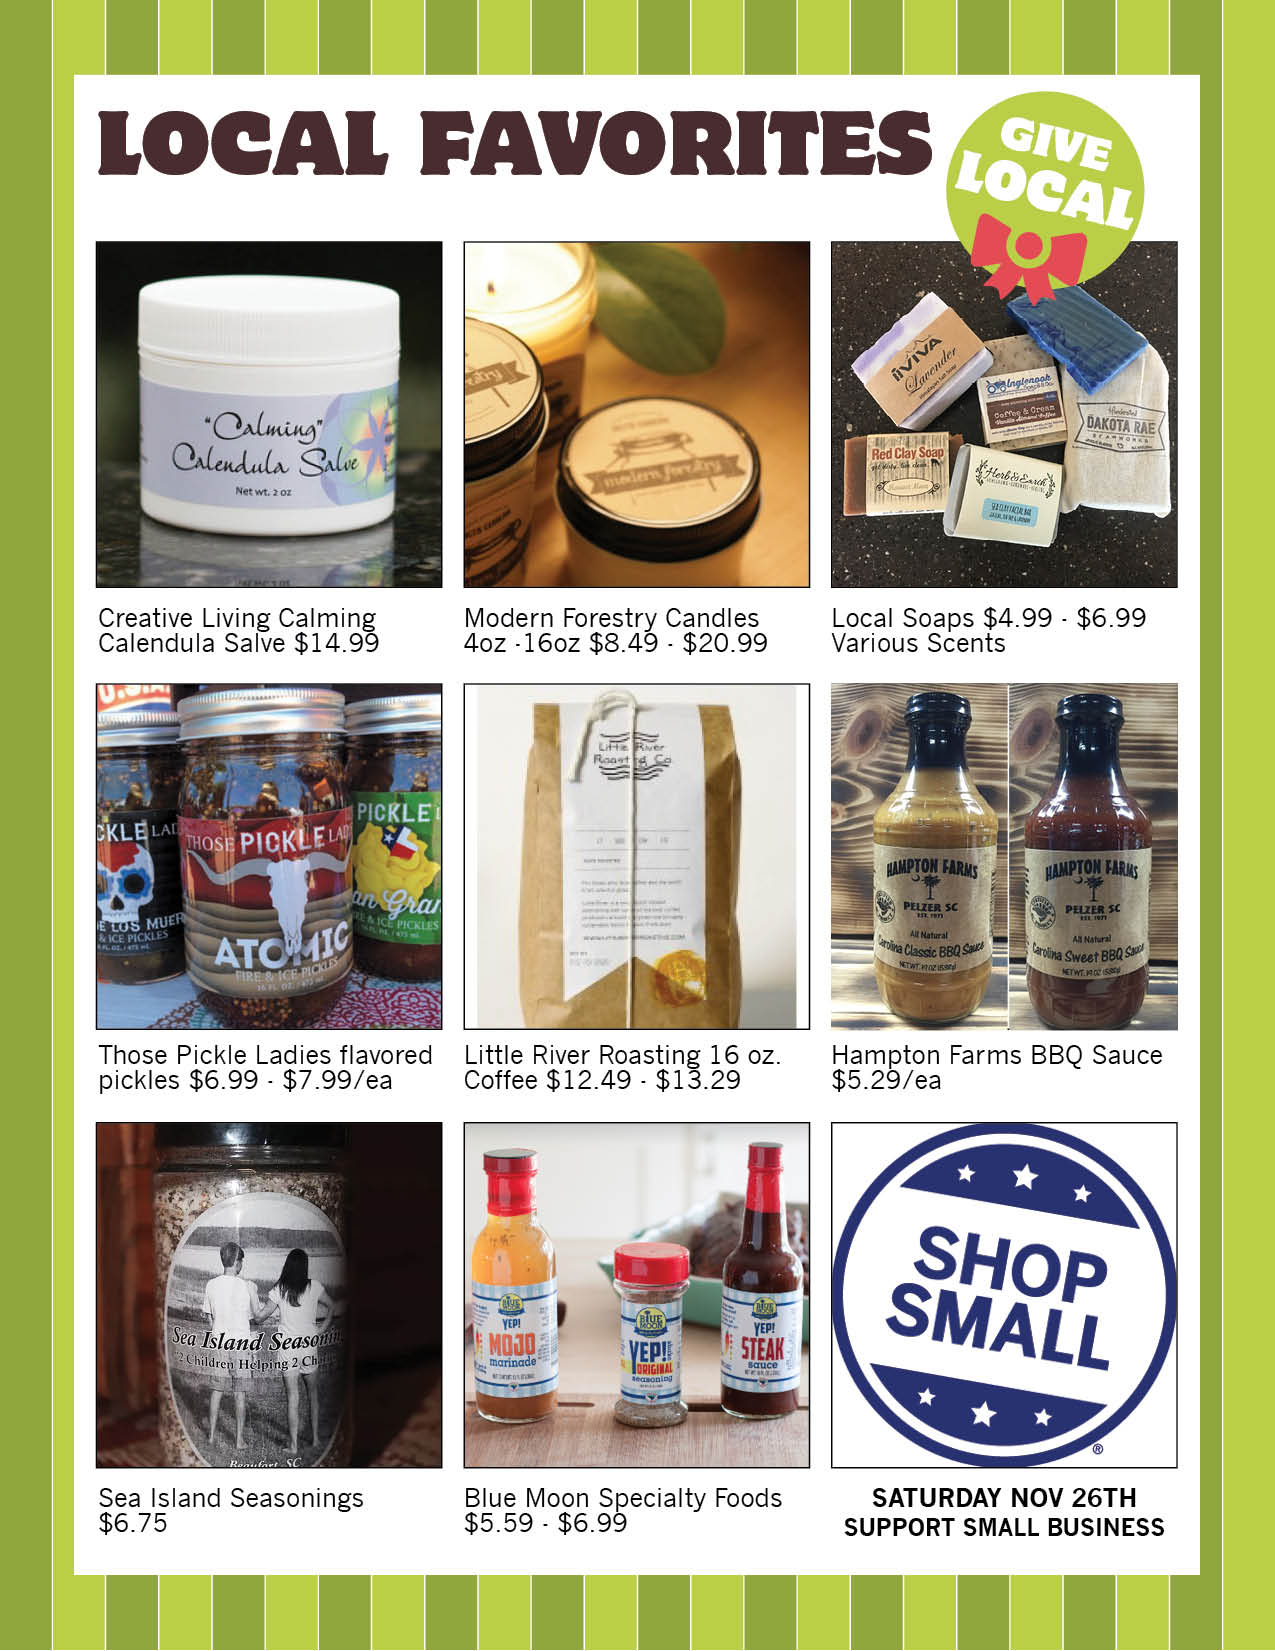 HCC Holiday Gift Guide 2016_4_Local_1118164.jpg